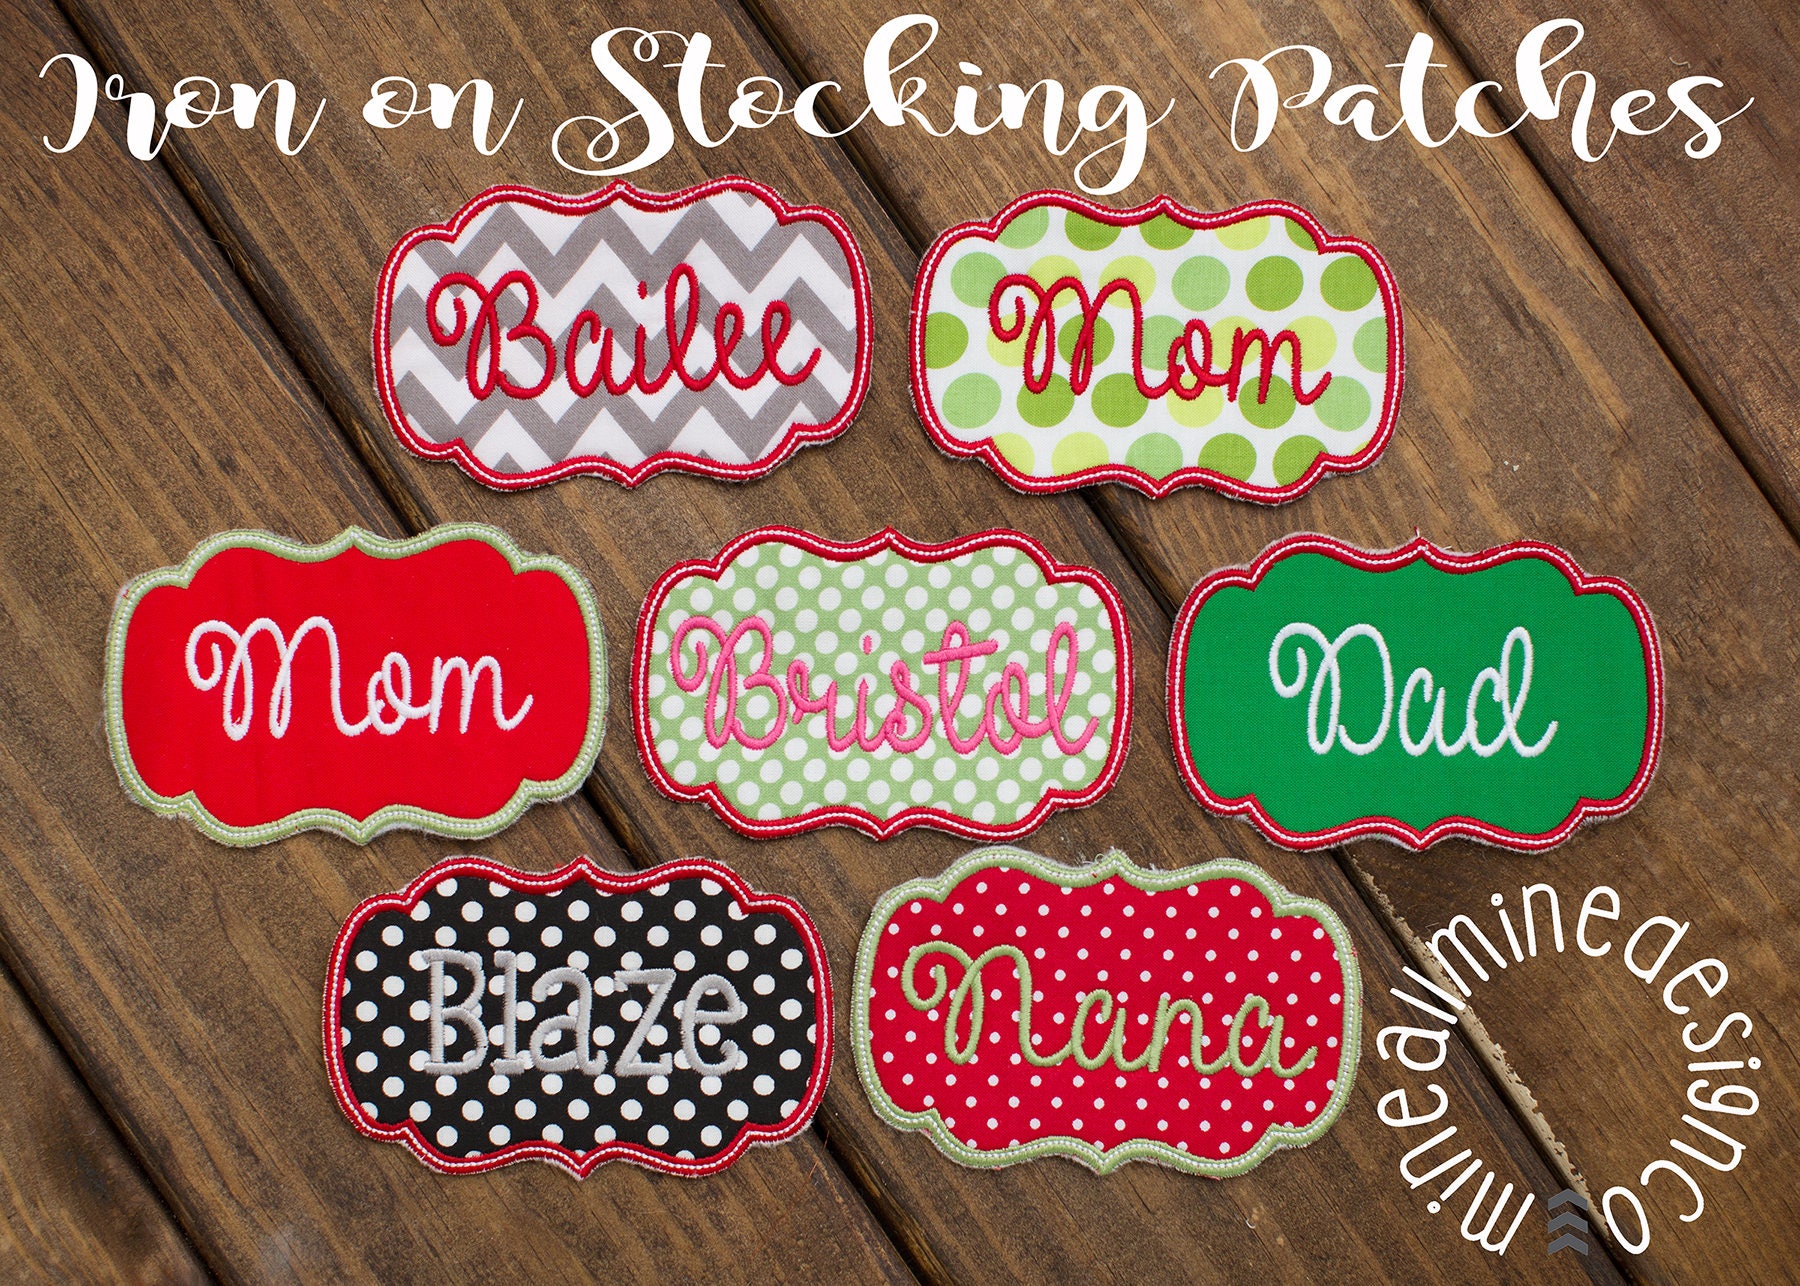 Custom Personalized Embroidered Iron On Name Patch Tag-Sparkling Red Glitter Or Red Fabric For Christmas Stockings And Holiday Items 1 Patch 